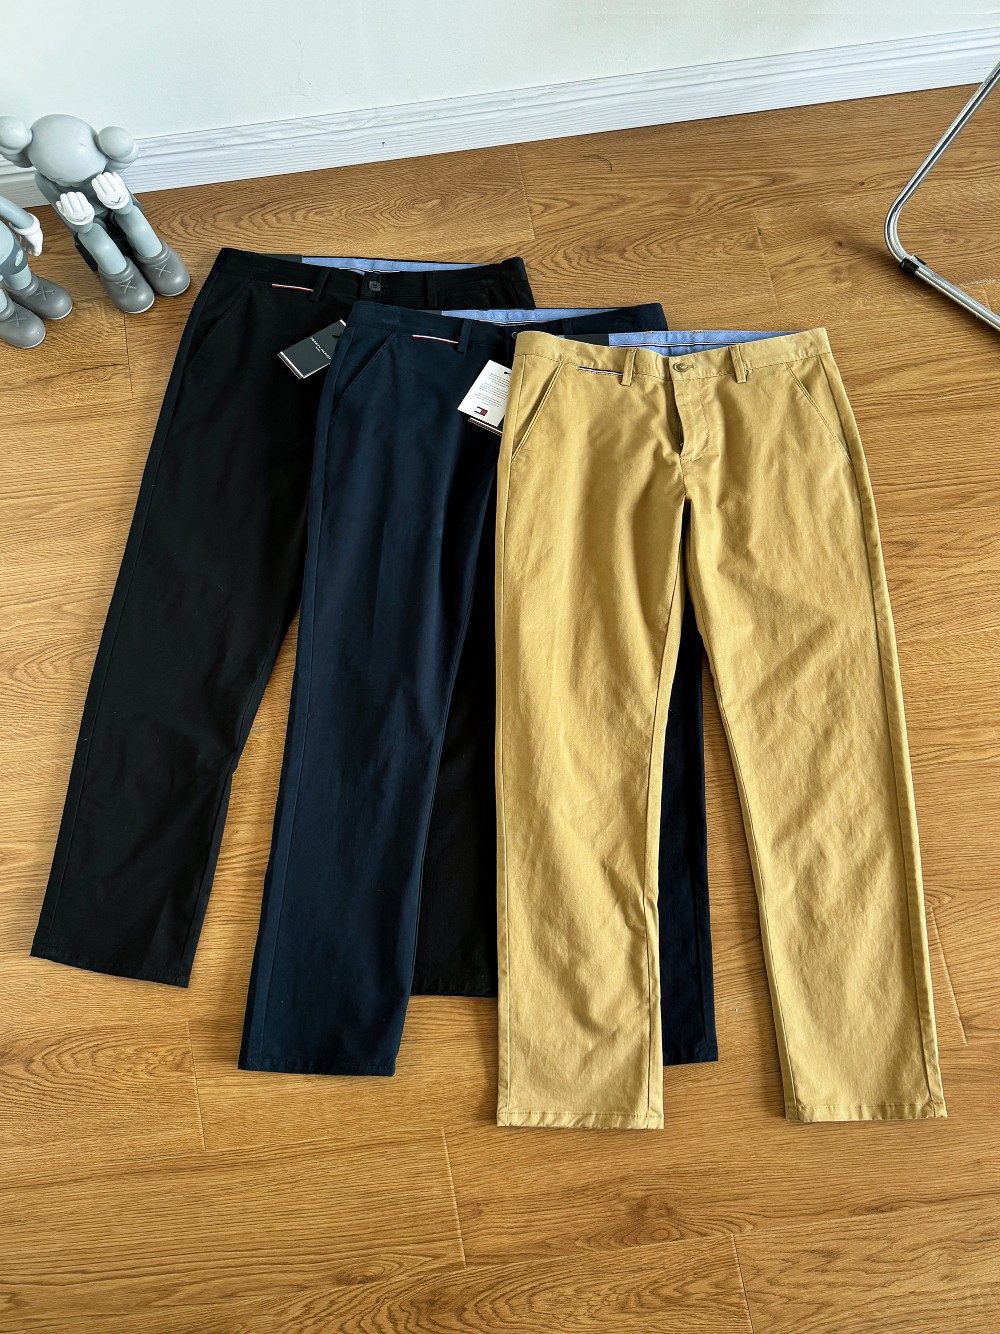 Tommy Clothing Pants & Trousers Black Khaki Men Cotton Spring/Fall Collection Fashion Casual